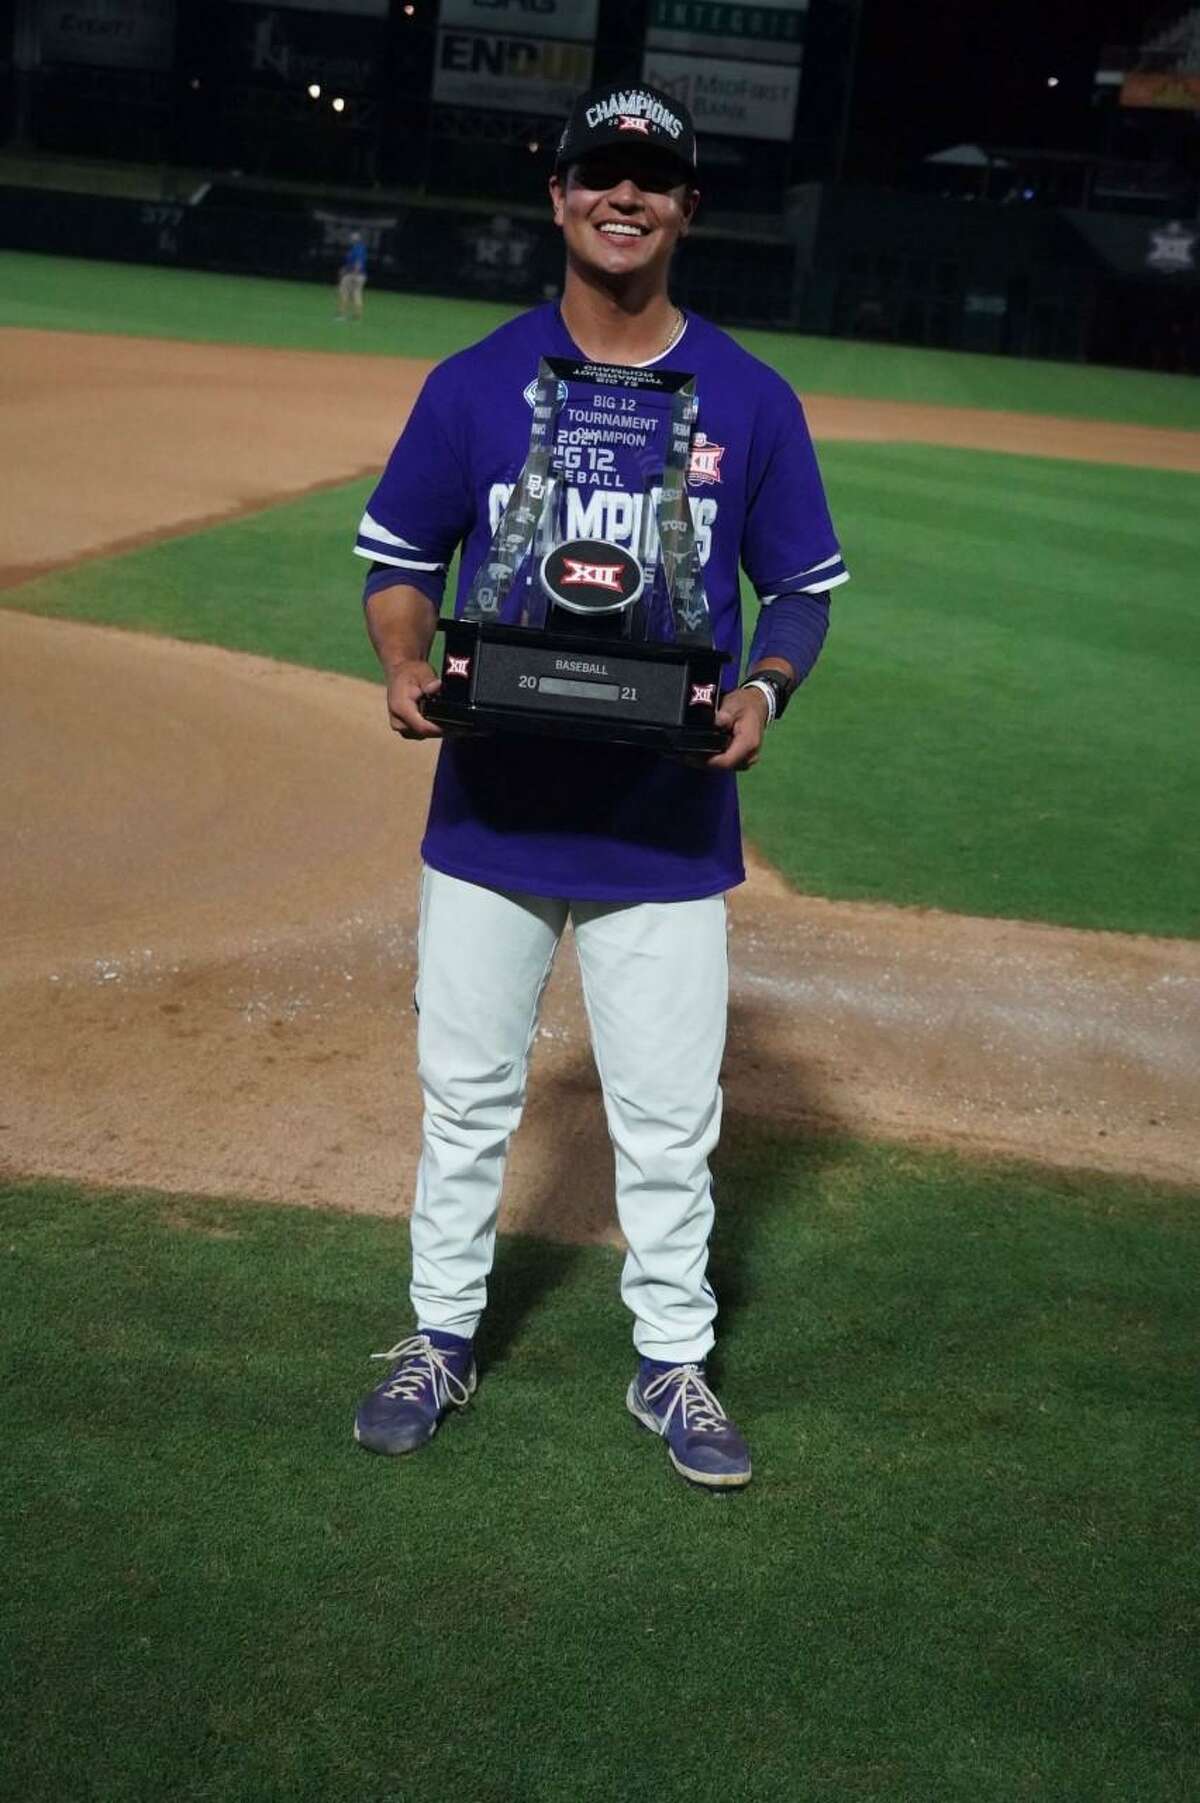 Marcelo Perez and TCU won the Big 12 title on Sunday with a 10-7 victory over Oklahoma State.